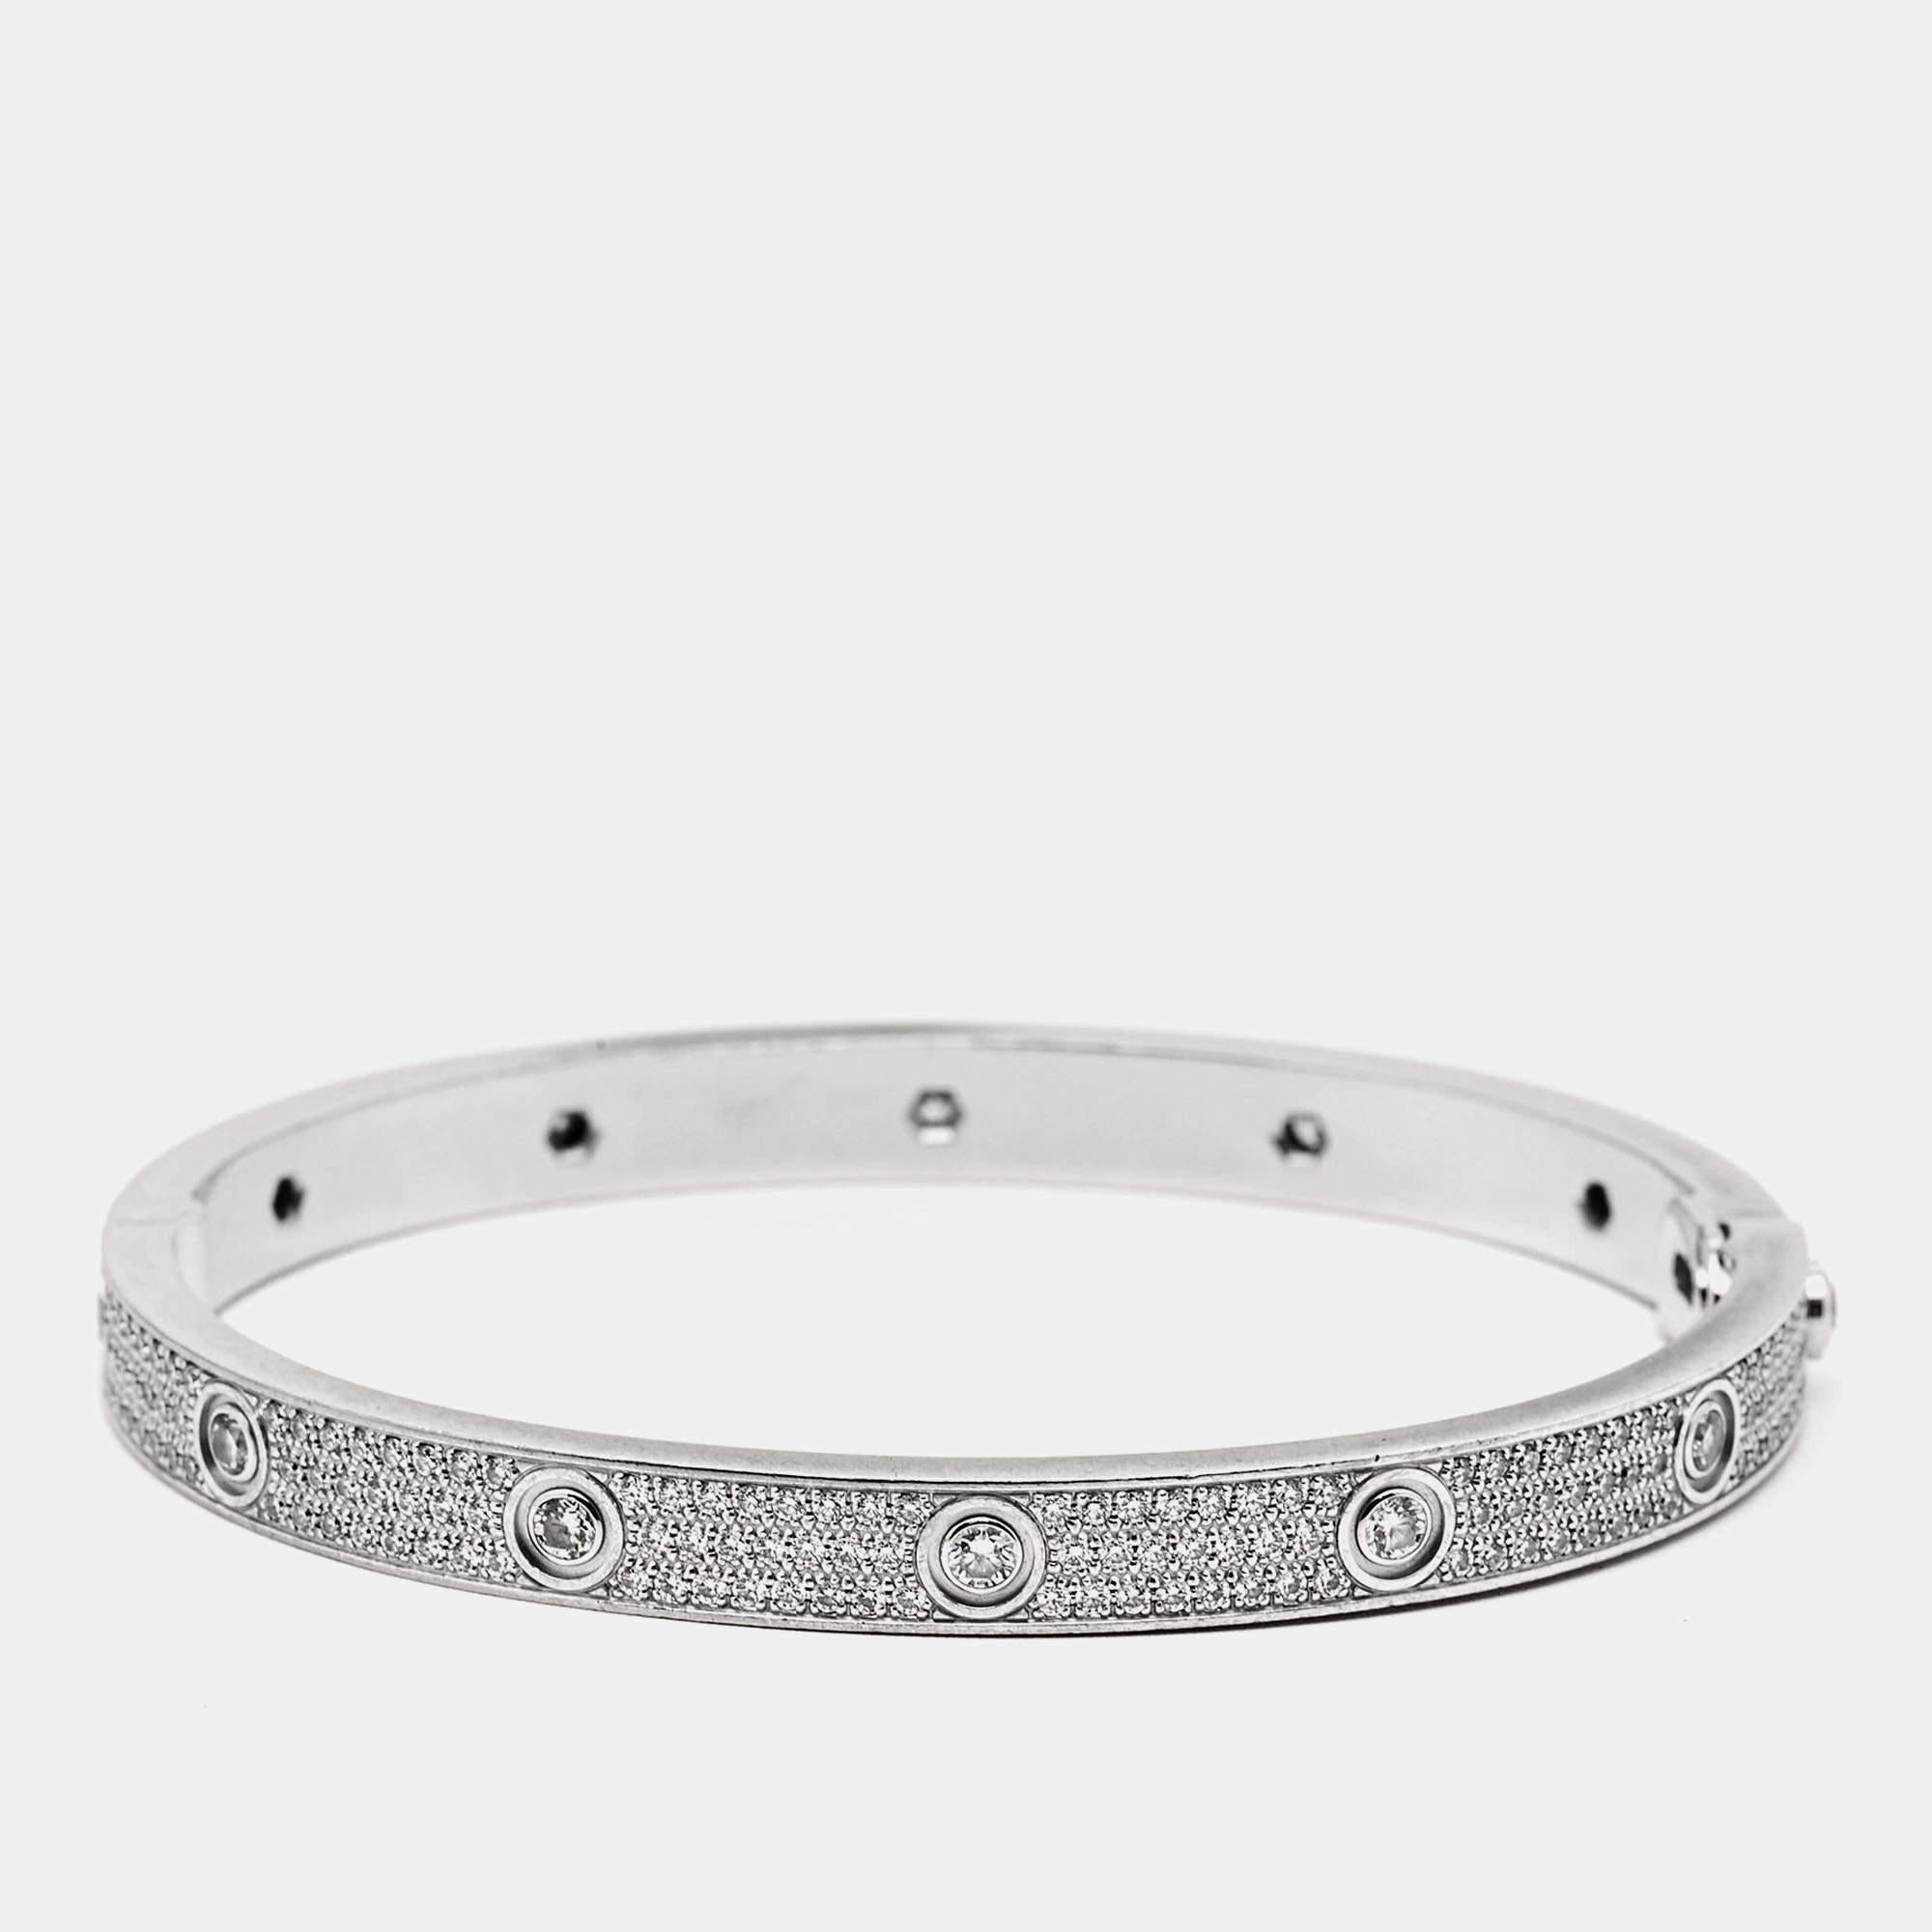 The Cartier bracelet is a luxurious masterpiece, crafted with exquisite precision. Set in gleaming 18k white gold, it features a stunning pavé of diamonds, adding timeless elegance to the iconic Love bracelet design, creating a symbol of enduring